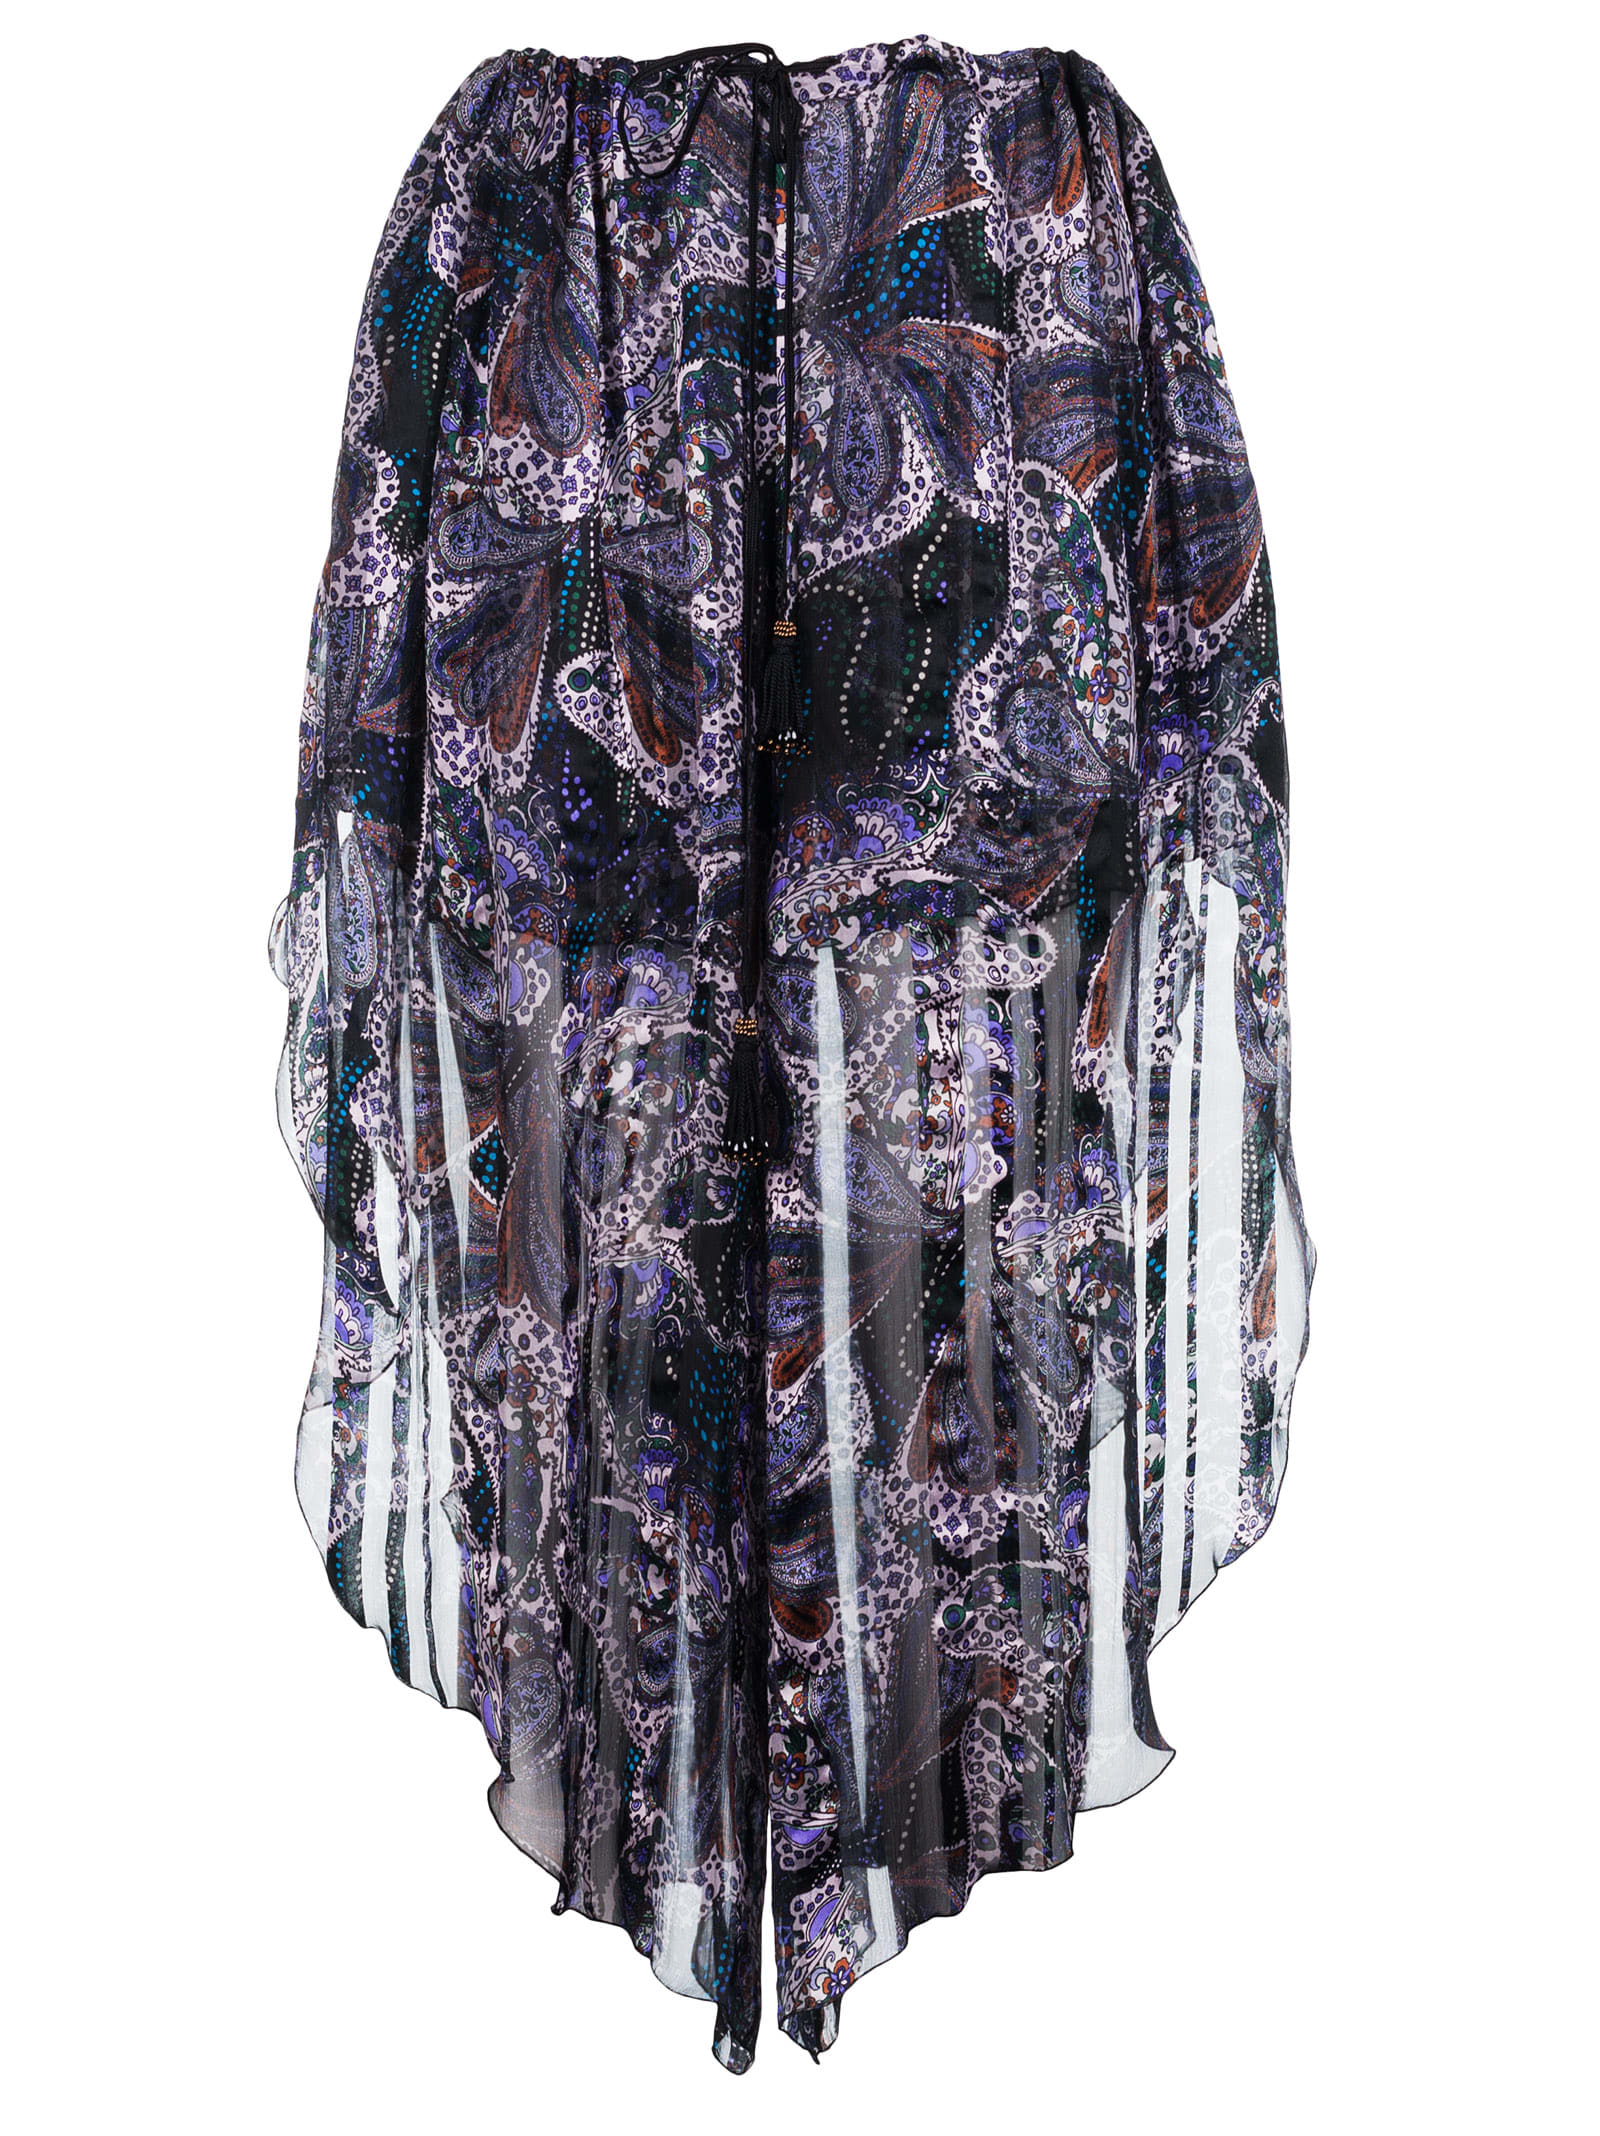 Etro Asymmetric Lace Floral Skirt In Multicolor